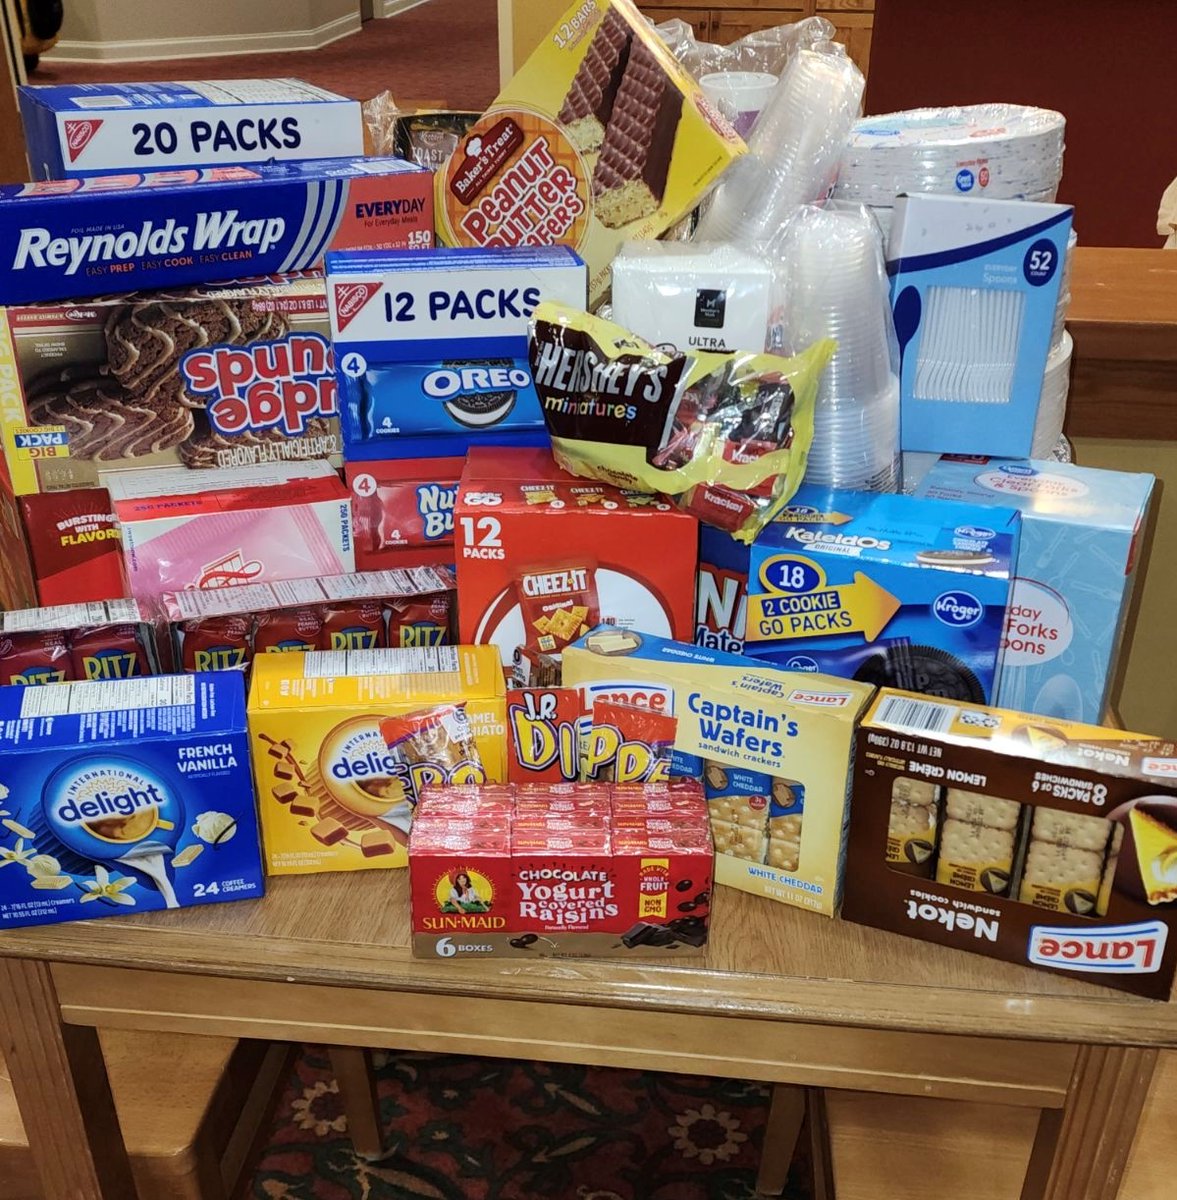 A BIG thank you to Limestone Presbyterian Church for the generous donation of snacks and supplies for our family kitchen at Liza's Place Care Center South!